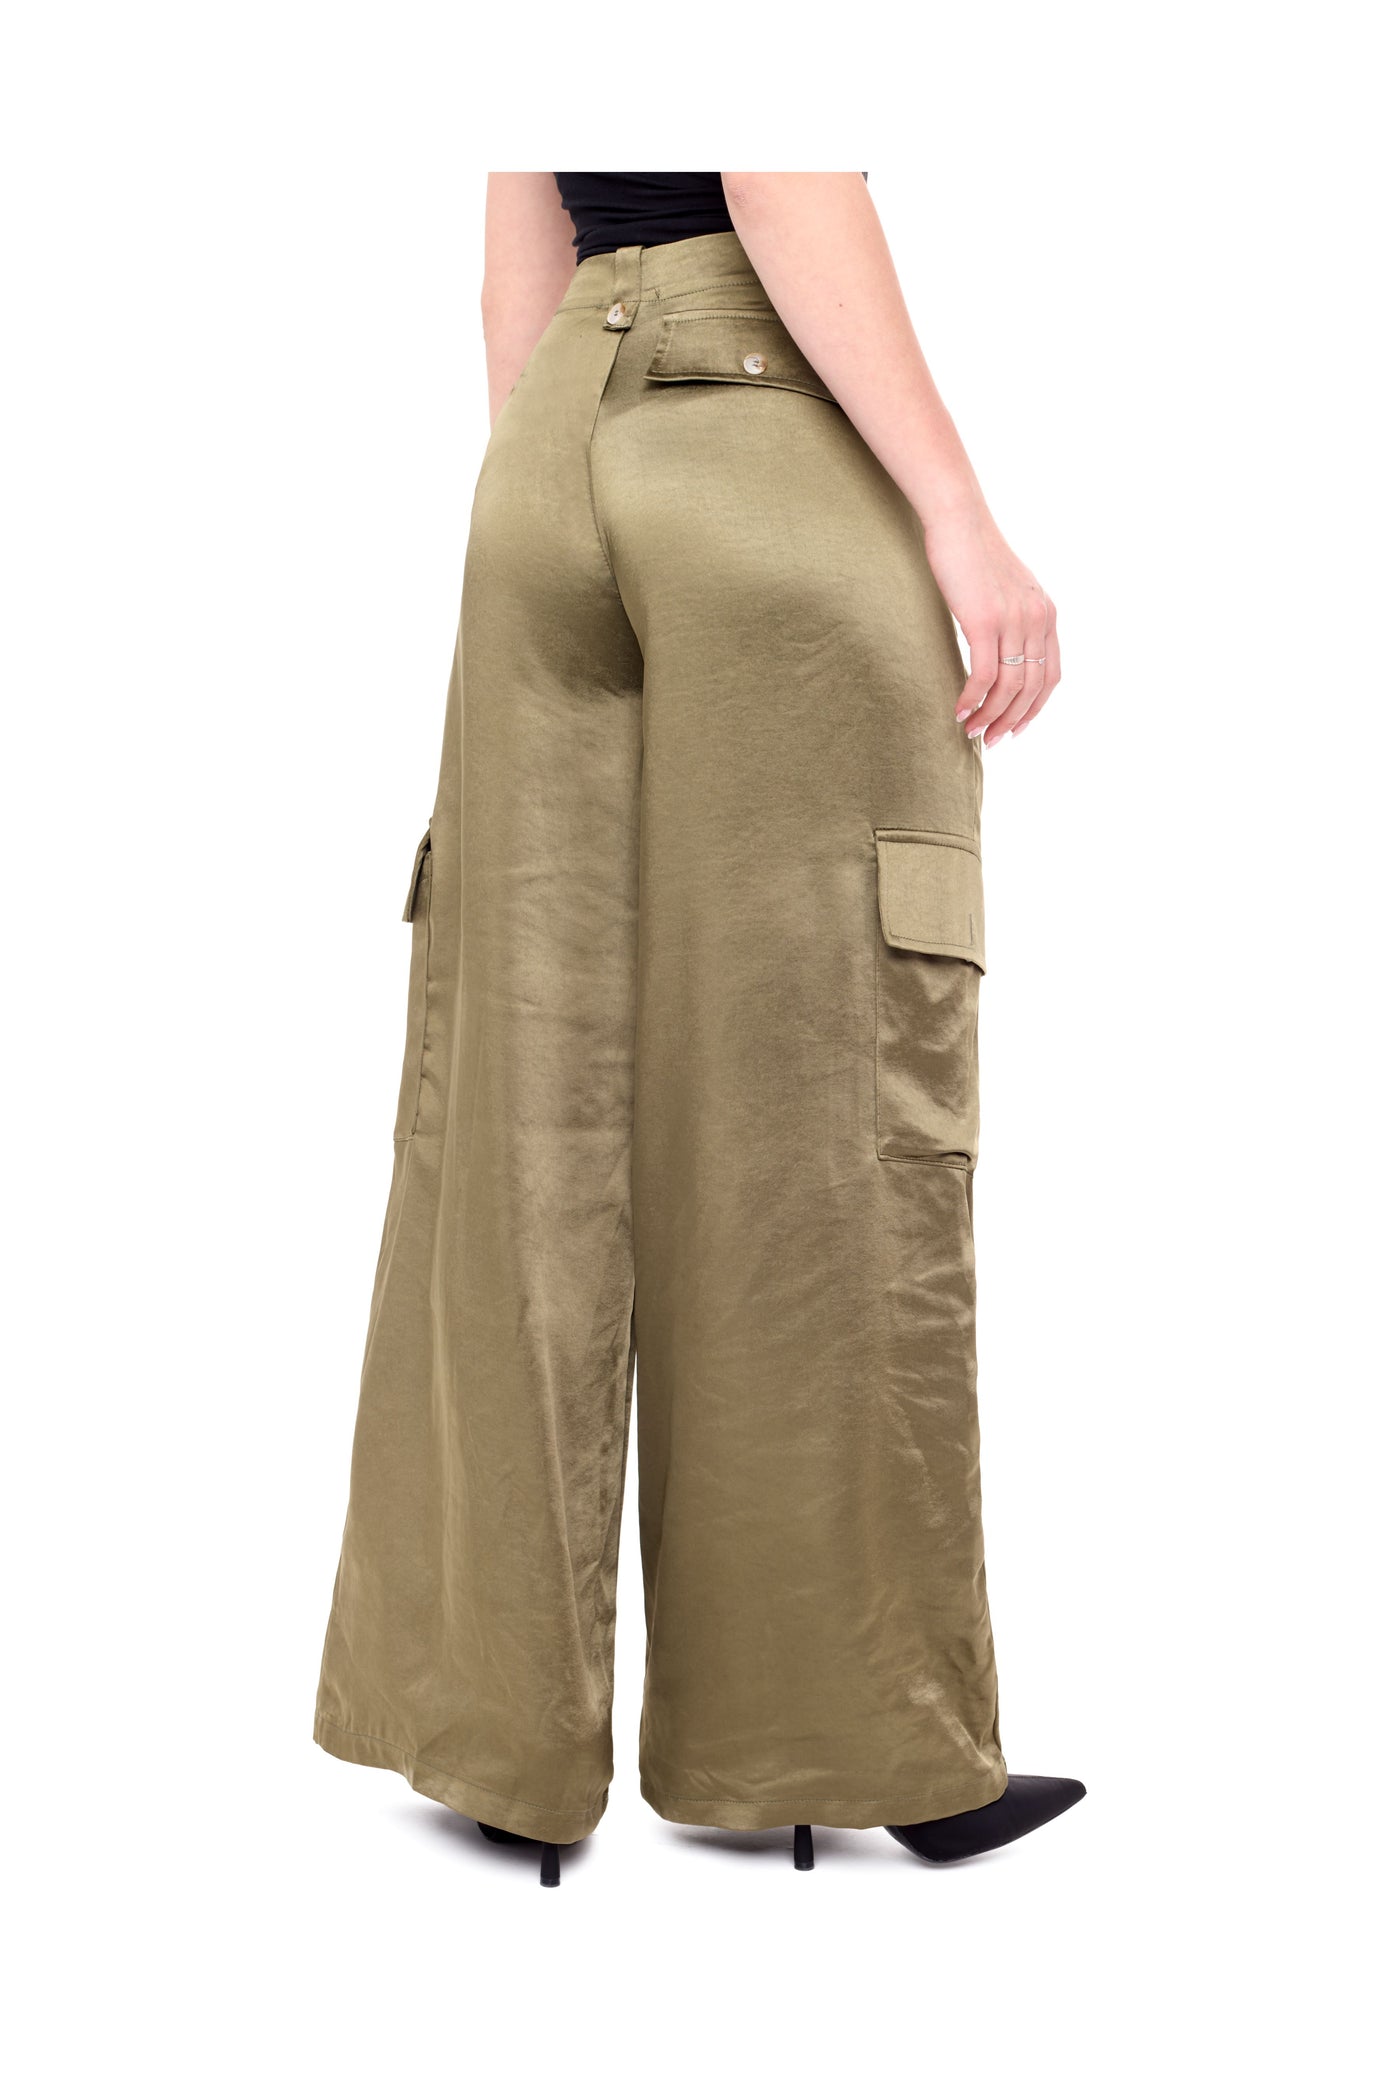 FIRESIDE CARGO PANT - army or black